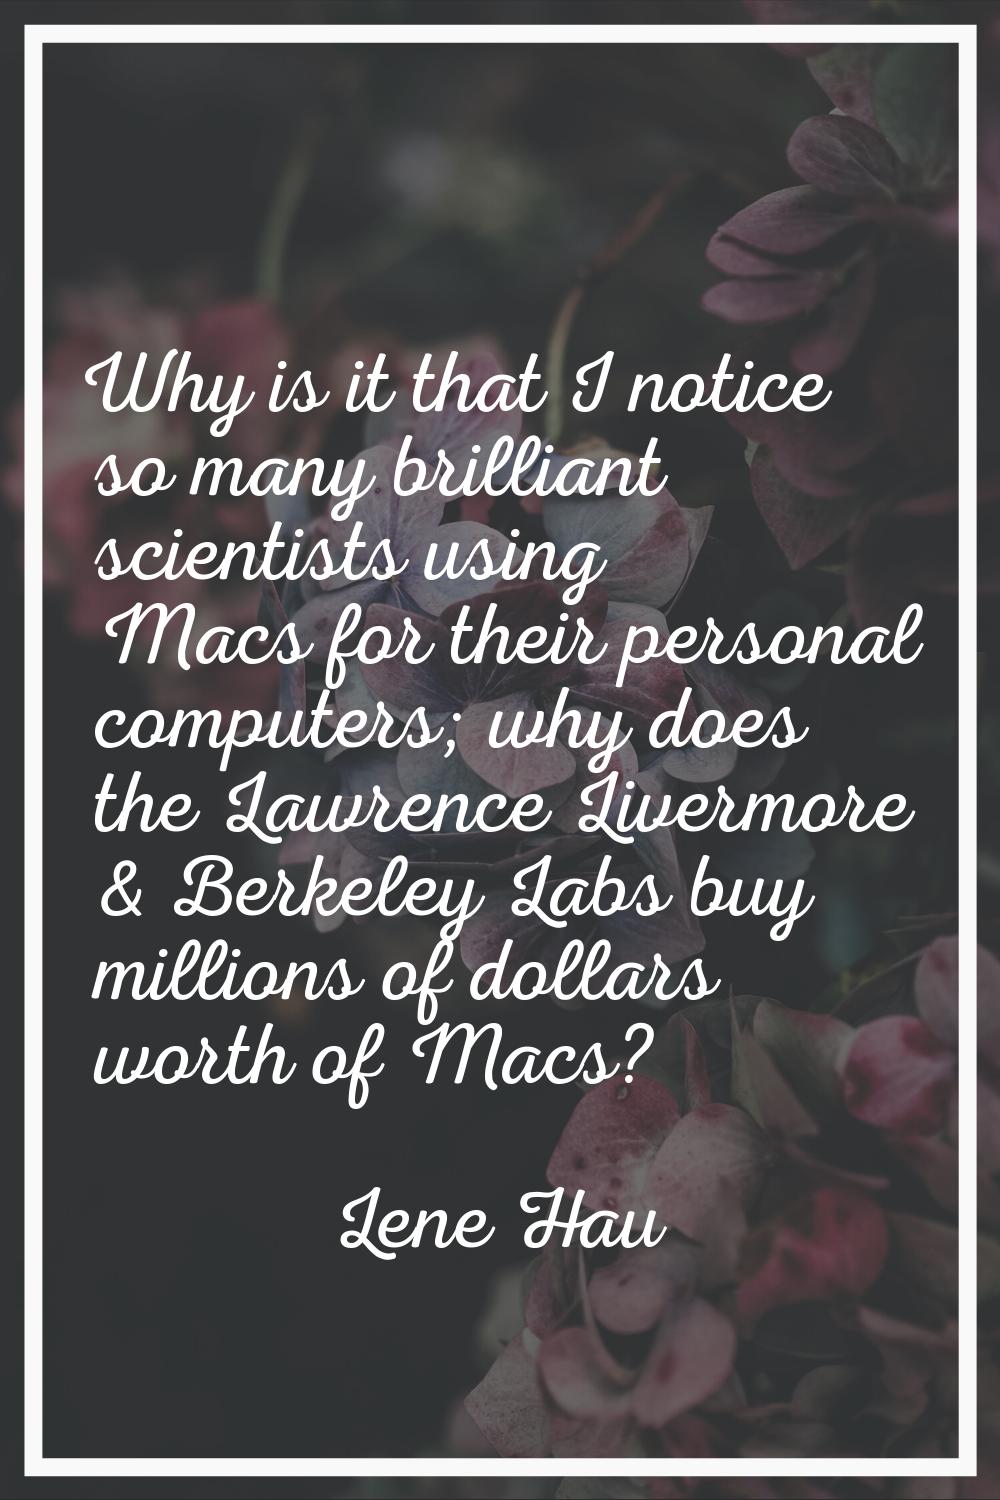 Why is it that I notice so many brilliant scientists using Macs for their personal computers; why d